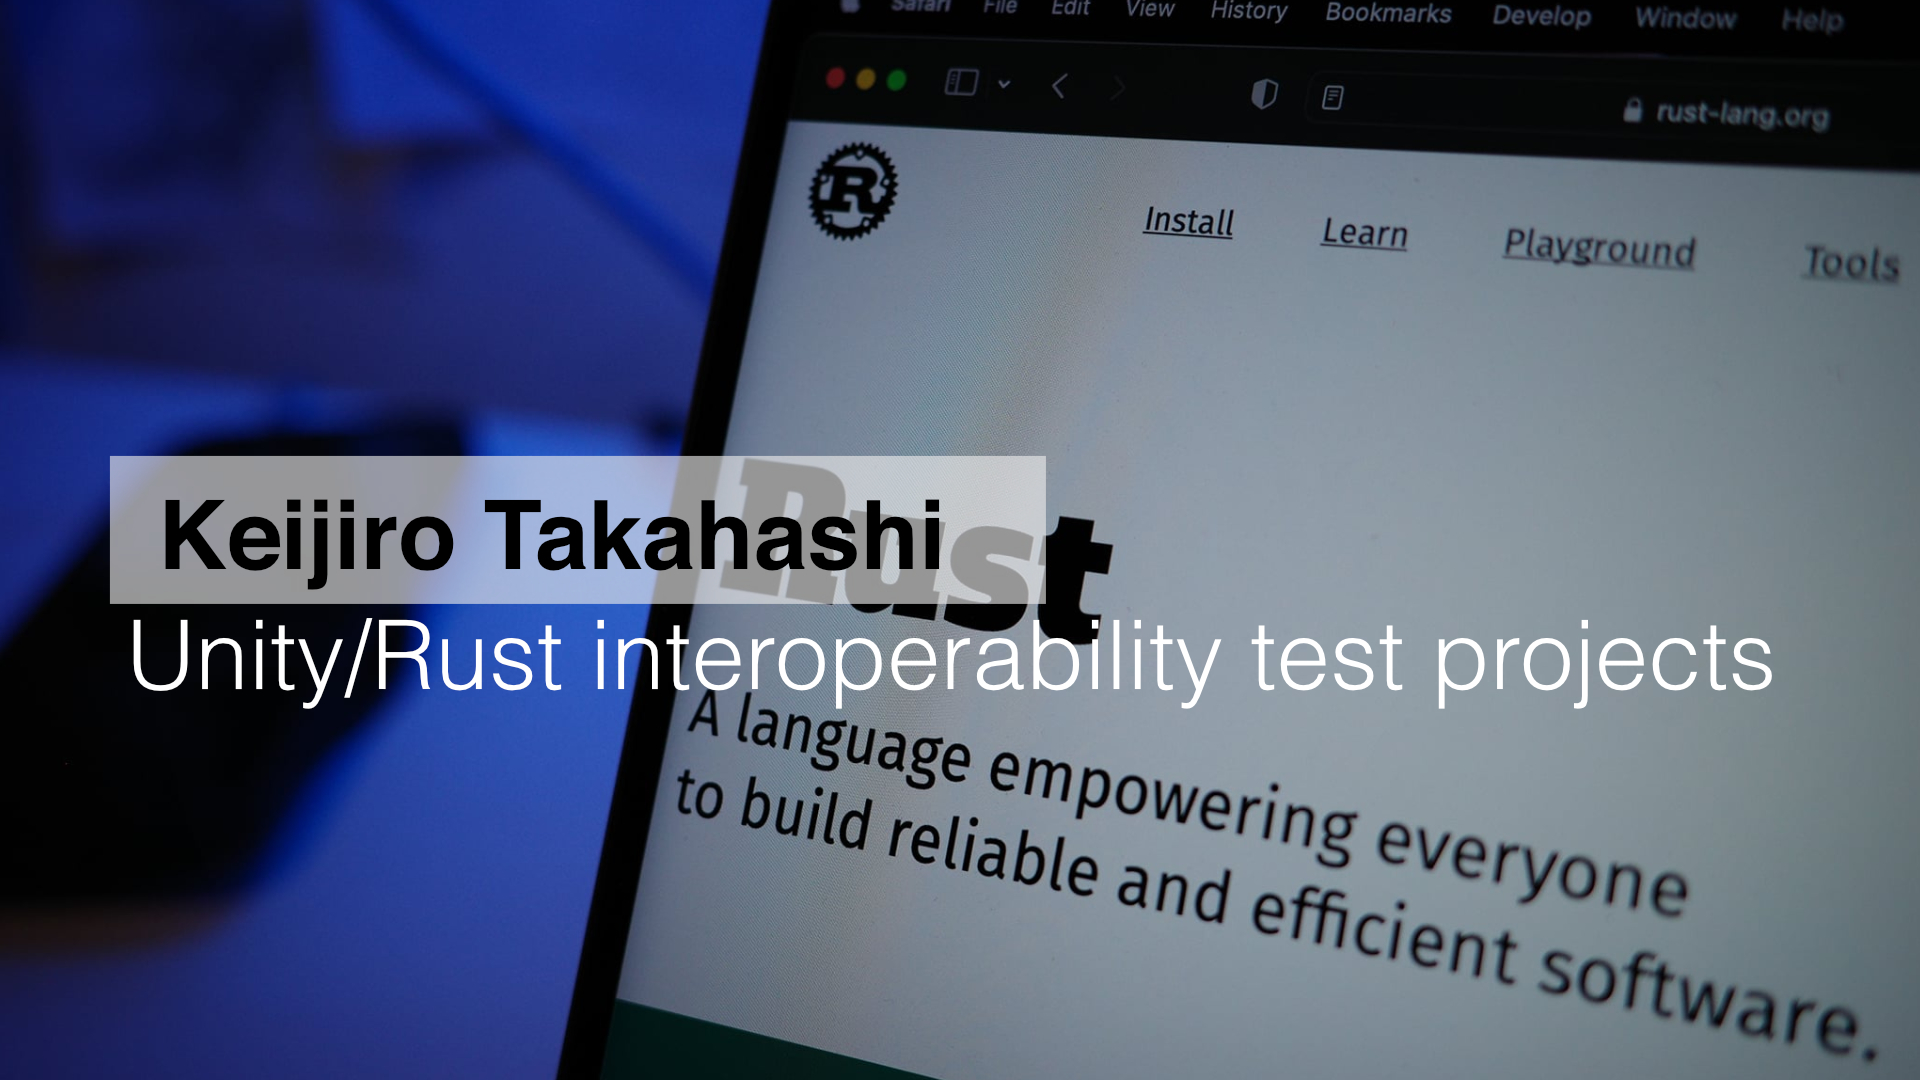 Cover image for Unity/Rust interoperability test projects from Keijiro Takahashi